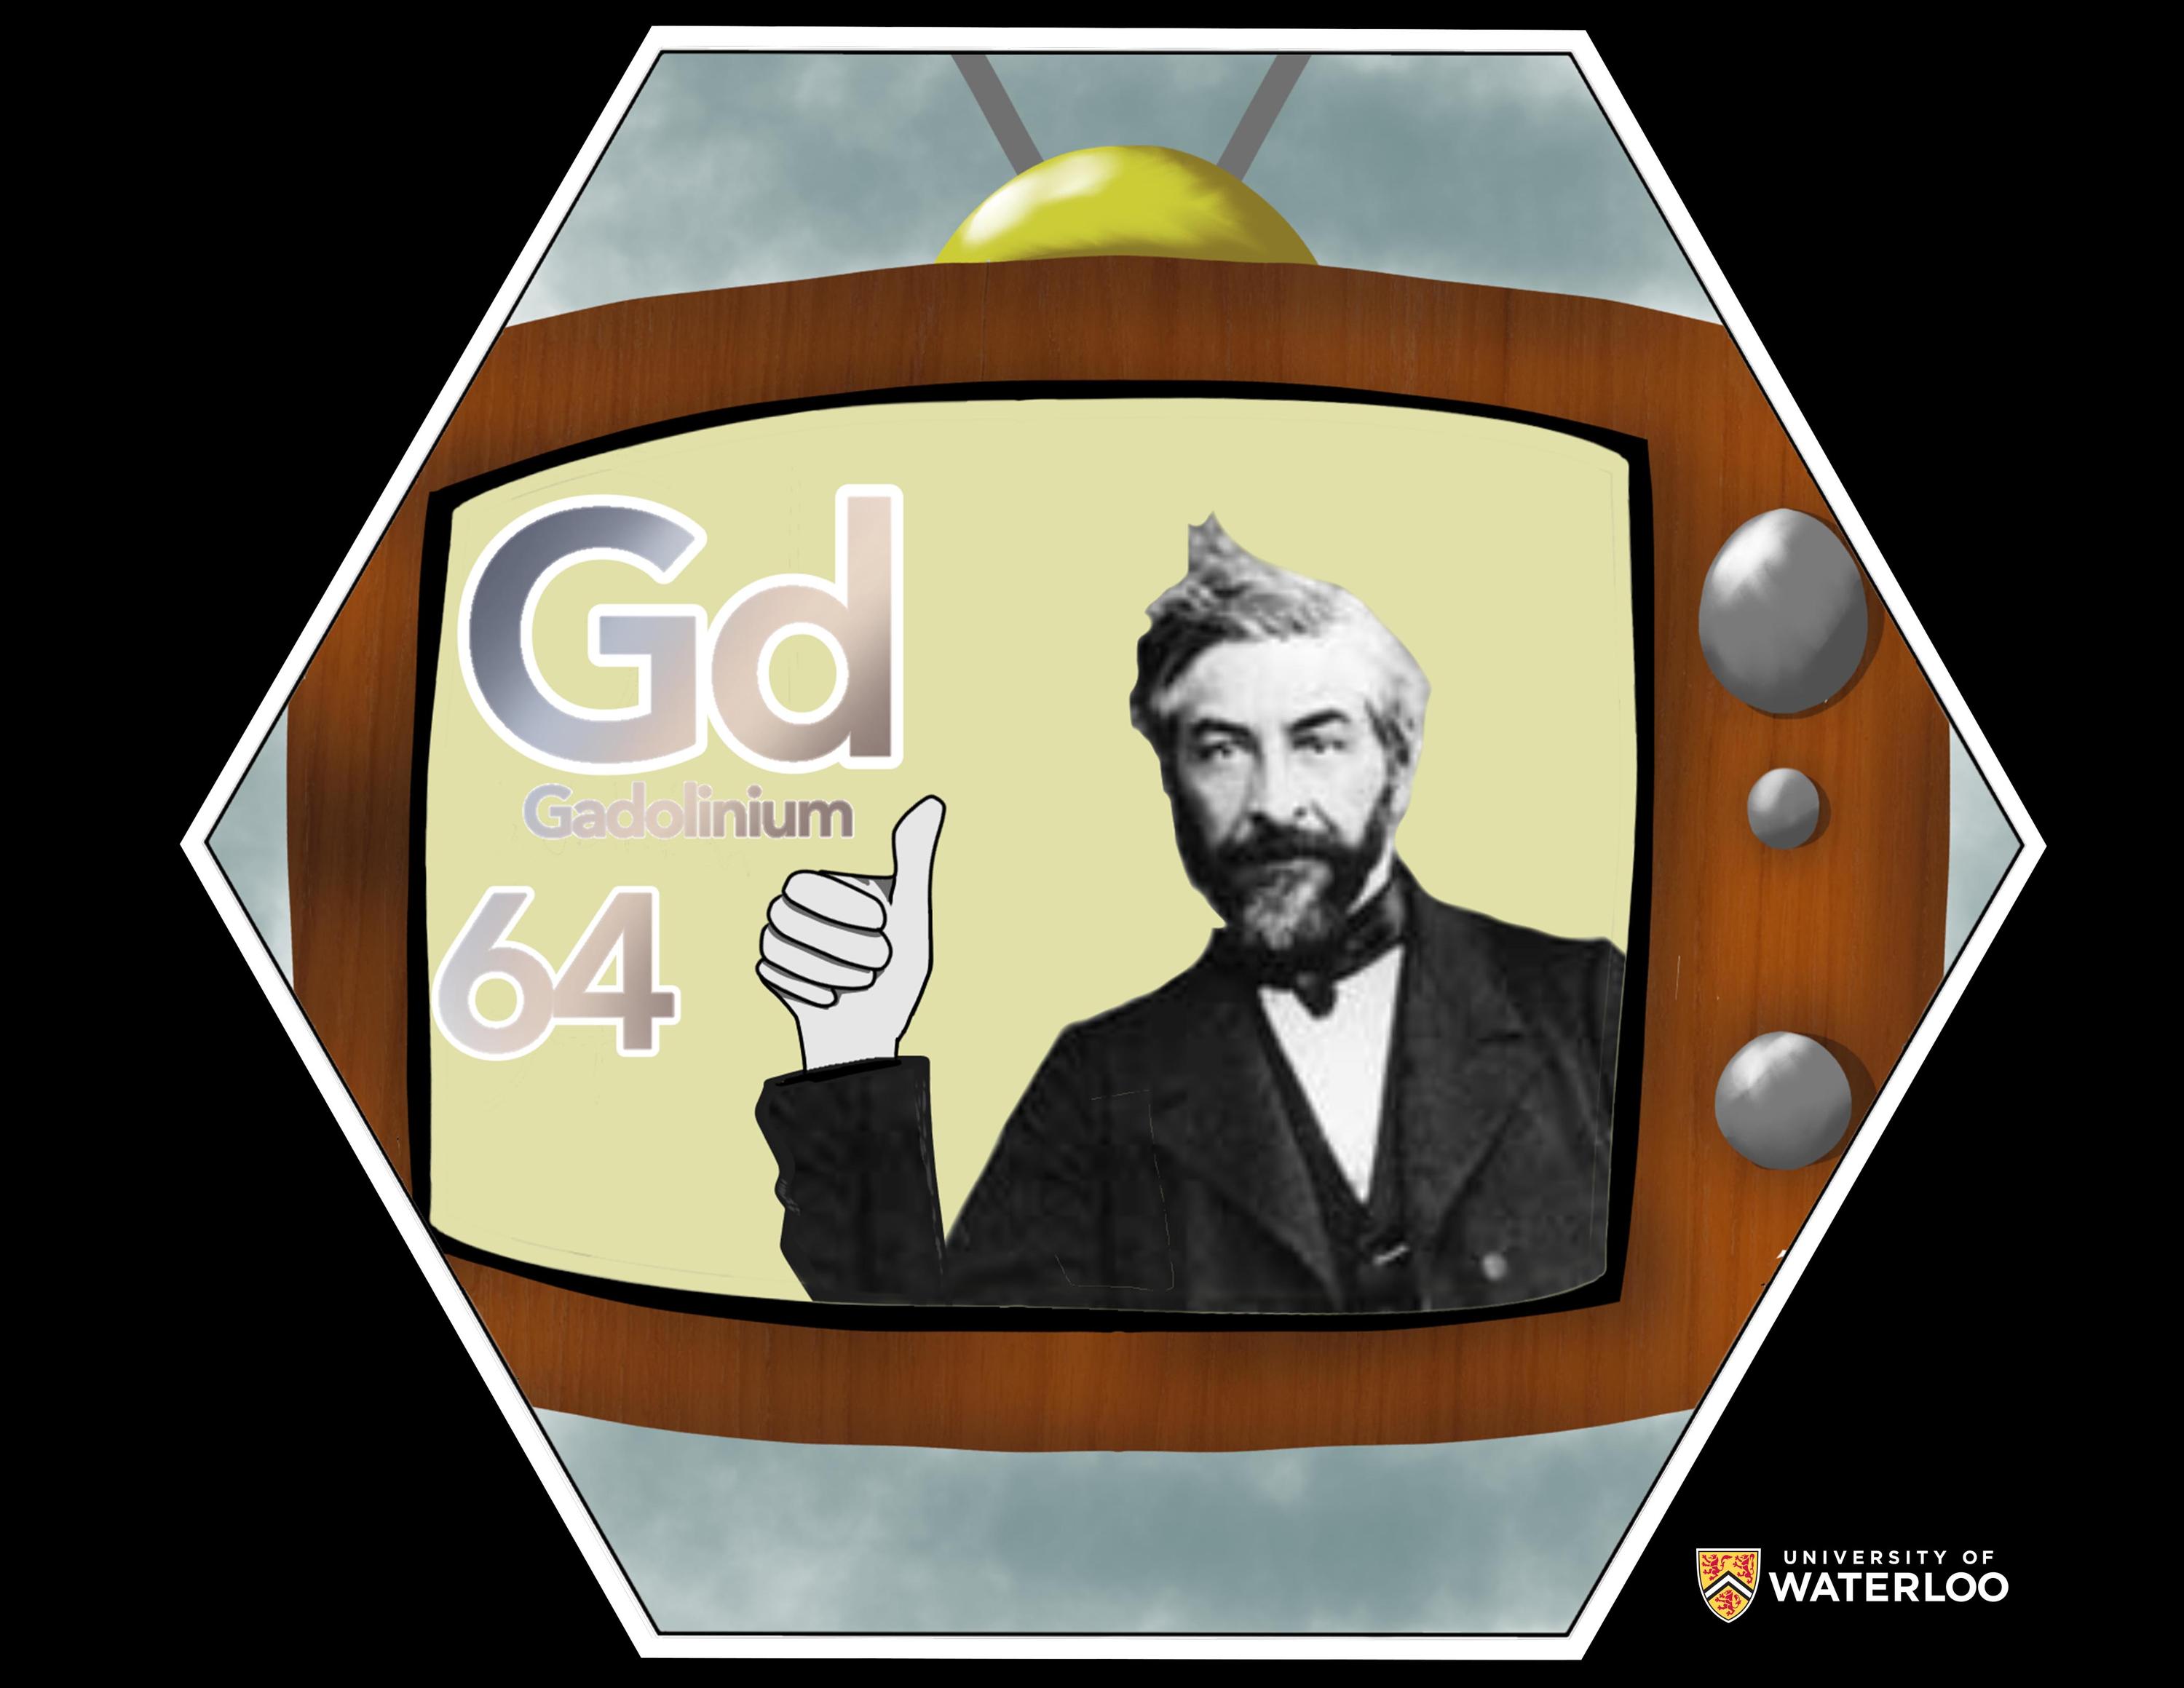 Digital composite. Background is an old fashioned television. Inside the screen is the chemical symbol “Gd”, “Gadolinium”, and “64”. To the right is Jean Charles Galissard de Marignac giving a thumbs up.